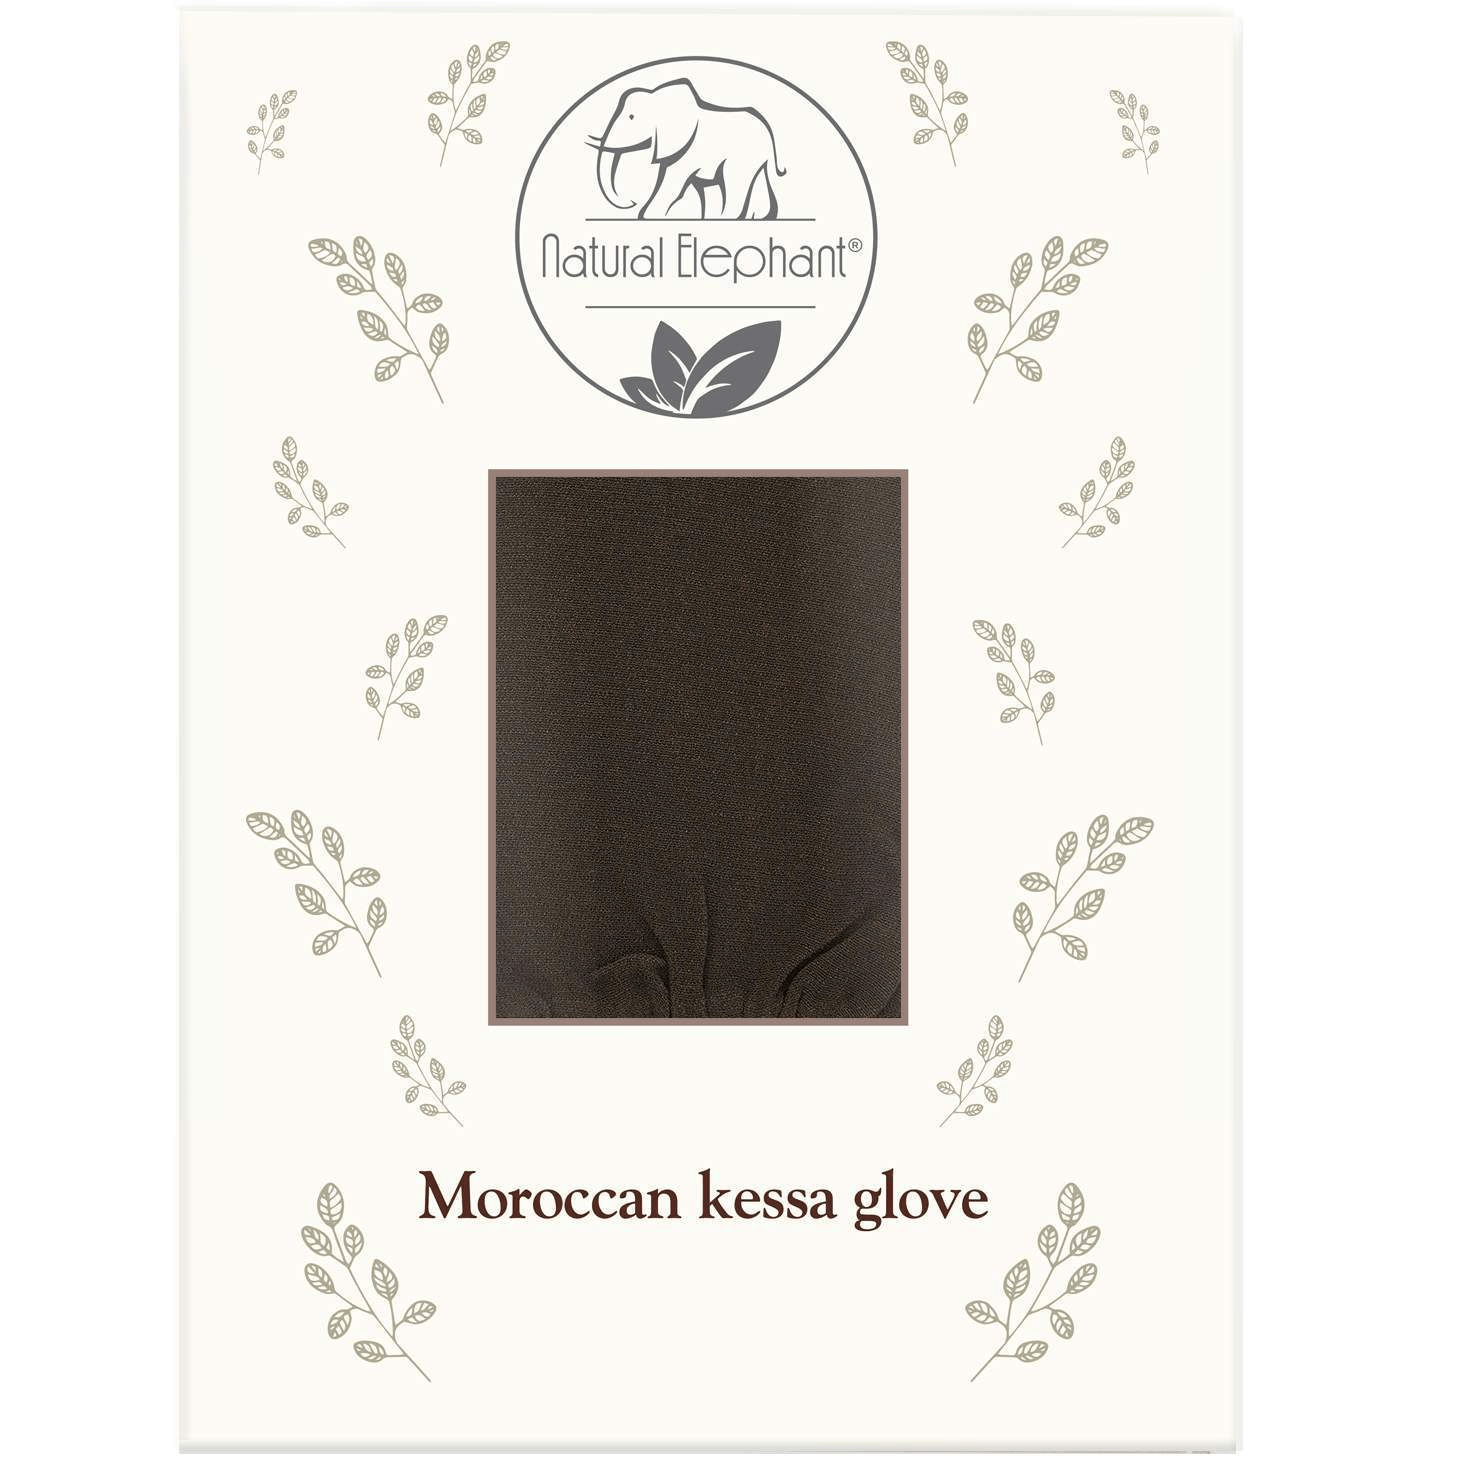 Natural Elephant Premium Moroccan Exfoliating Hammam Glove-Natural Elephant-BB_Bath and Shower,BB_Scrubs and Exfoliators,Brand_Natural Elephant,Collection_Bath and Body,Collection_Skincare,Concern_Acne & Blemishes,Concern_Dry Skin,Concern_Dryness,Concern_Dullness,Concern_Eczema,Concern_Large Pores,Concern_Oily Skin,Concern_Sensitive Skin,FABS_Friday2022,NATURAL_Morroccan Collection